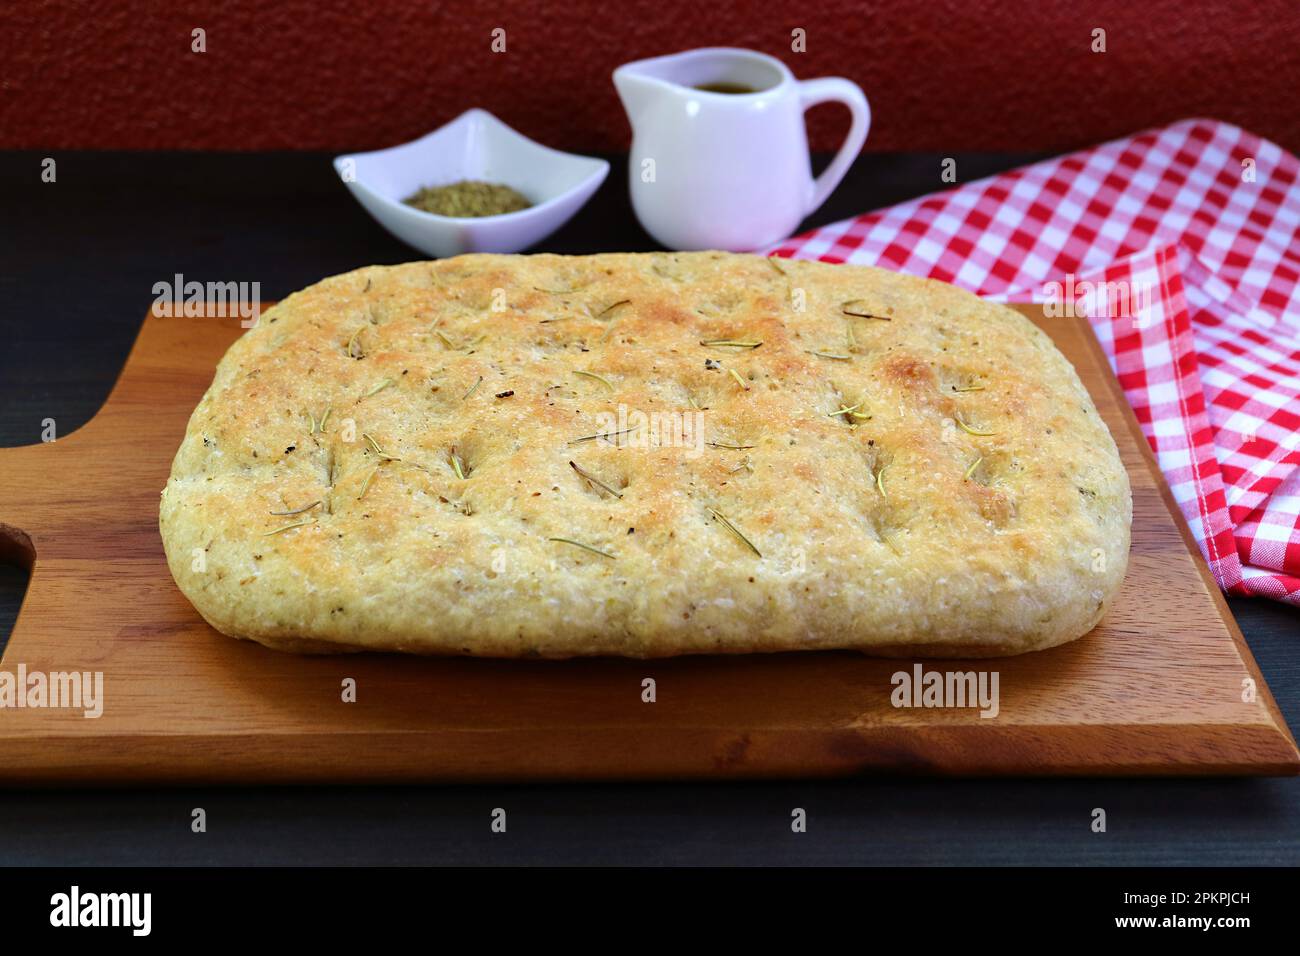 Delectable Freshly Baked Italian Herbed Focaccia Bread on Wooden Breadboard Stock Photo